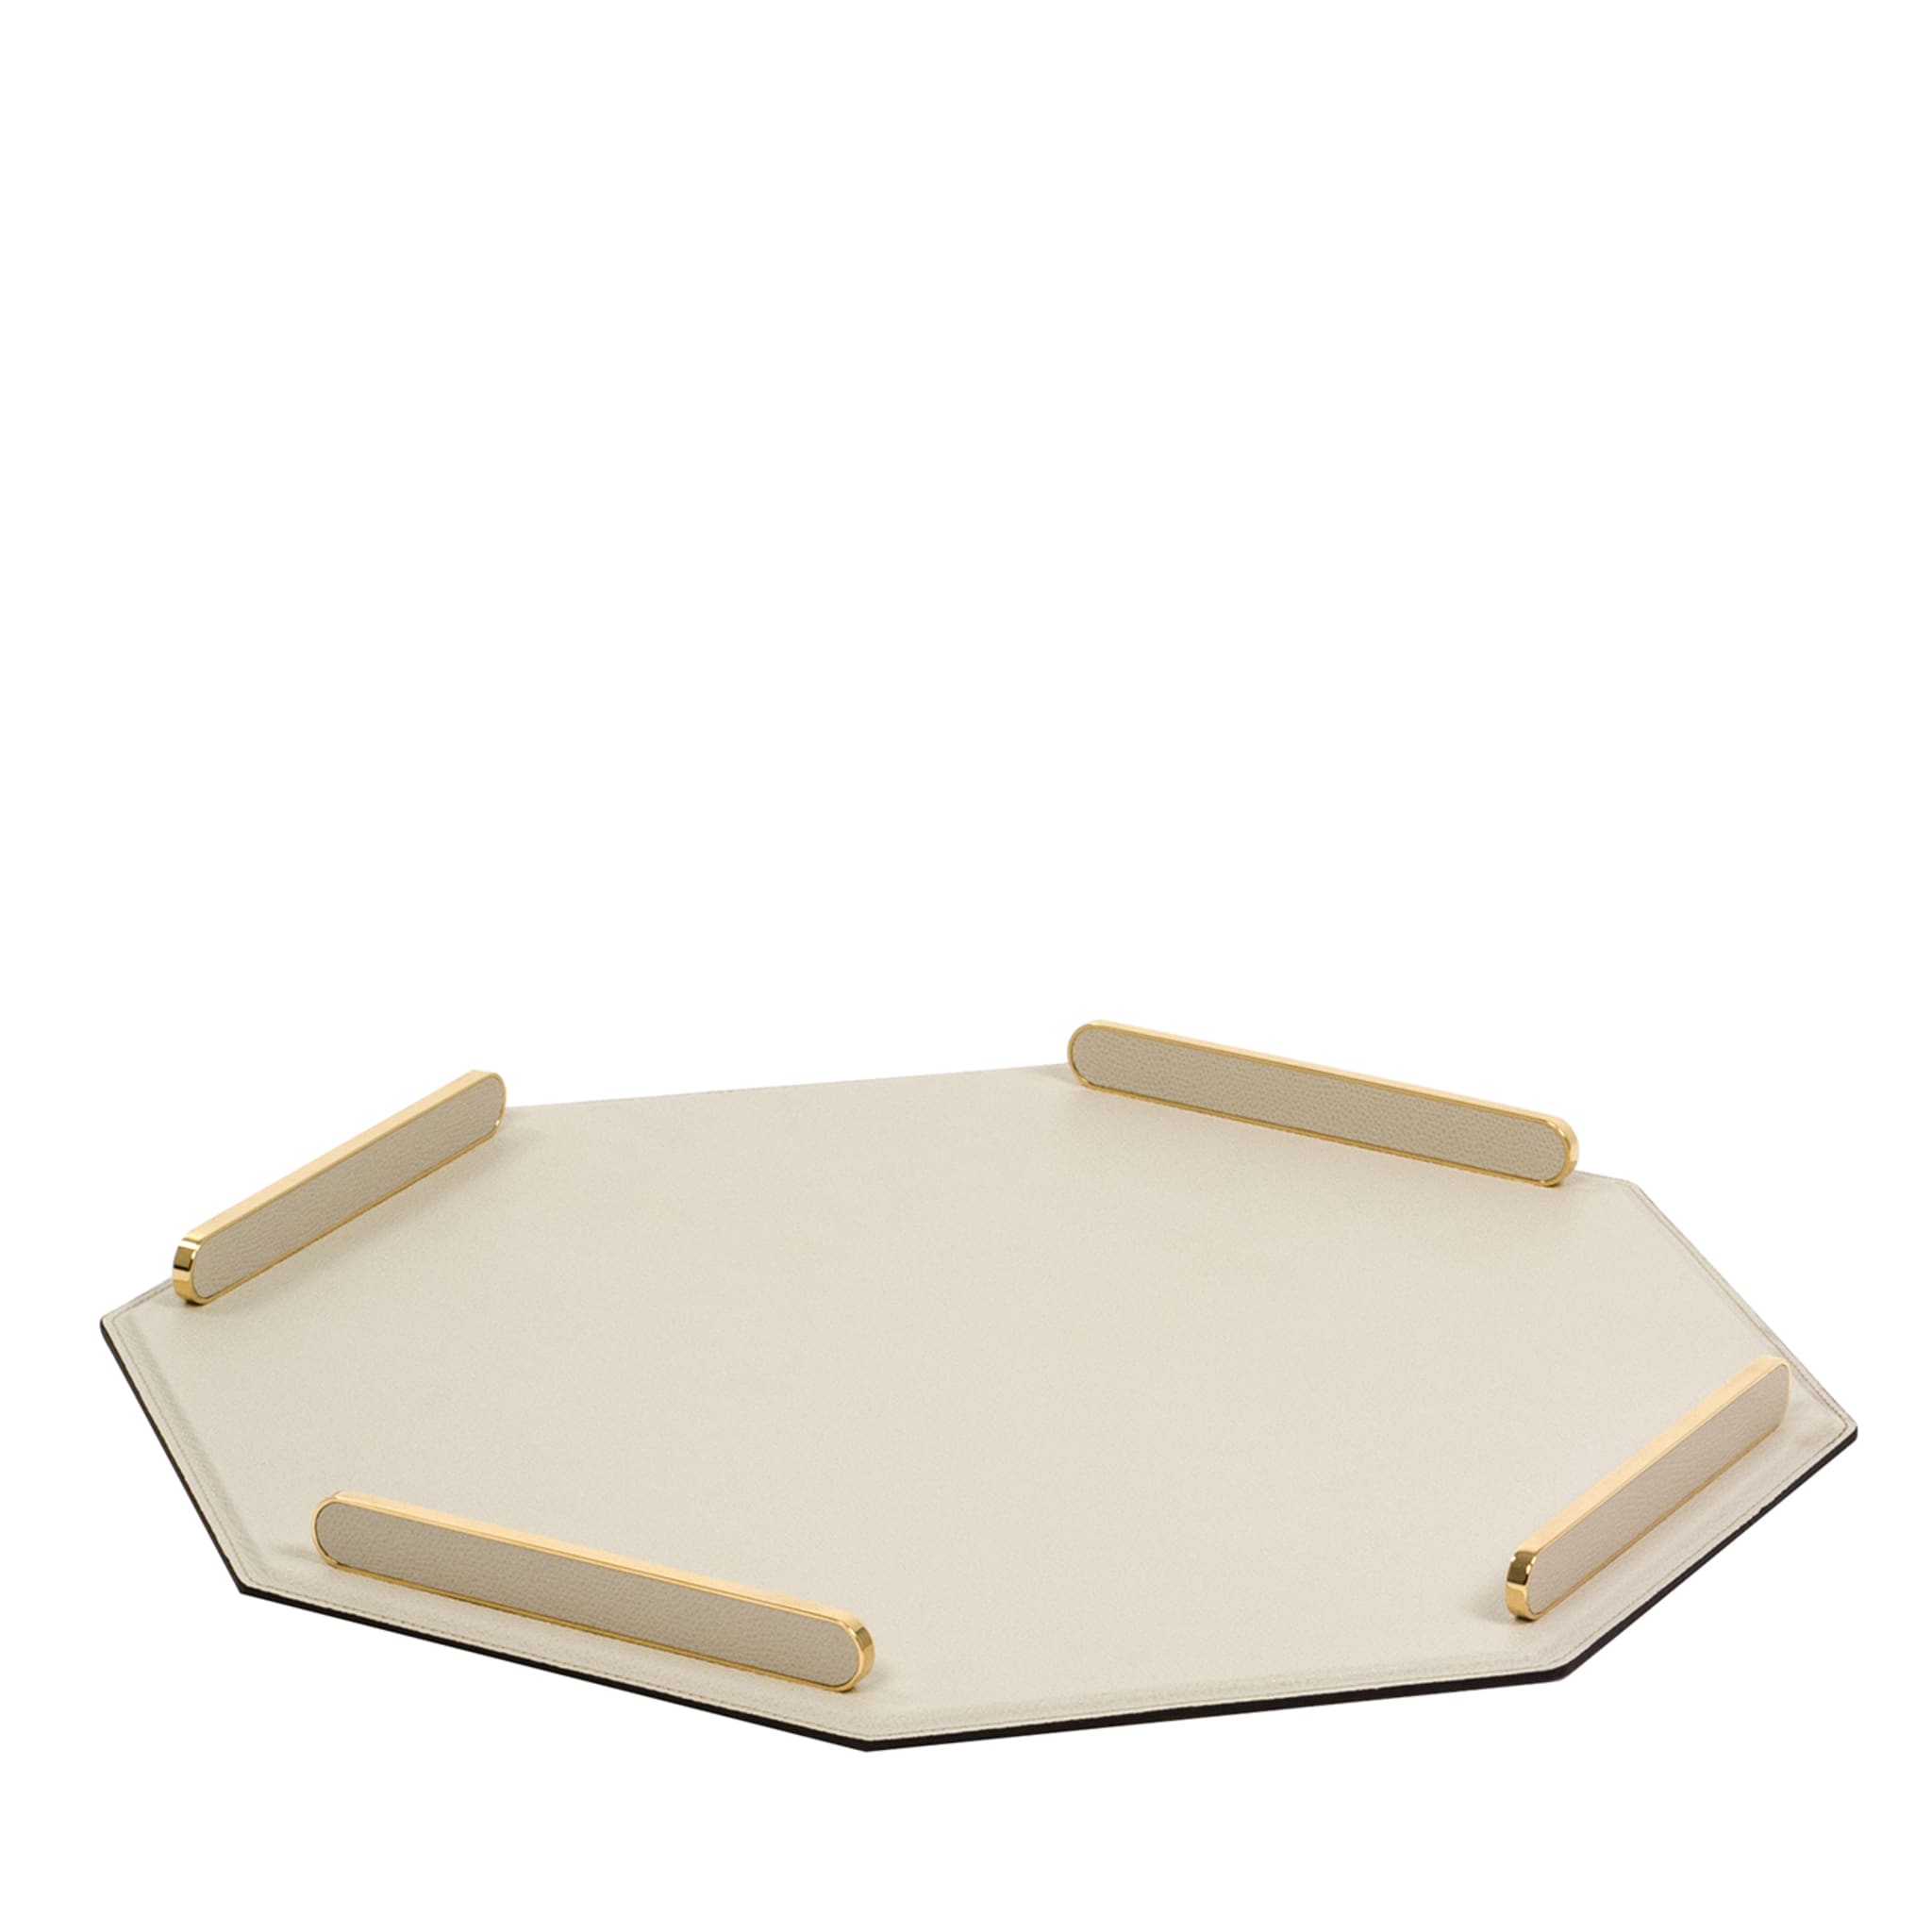 Octagonal Golden/Beige Leather Tray  - Main view